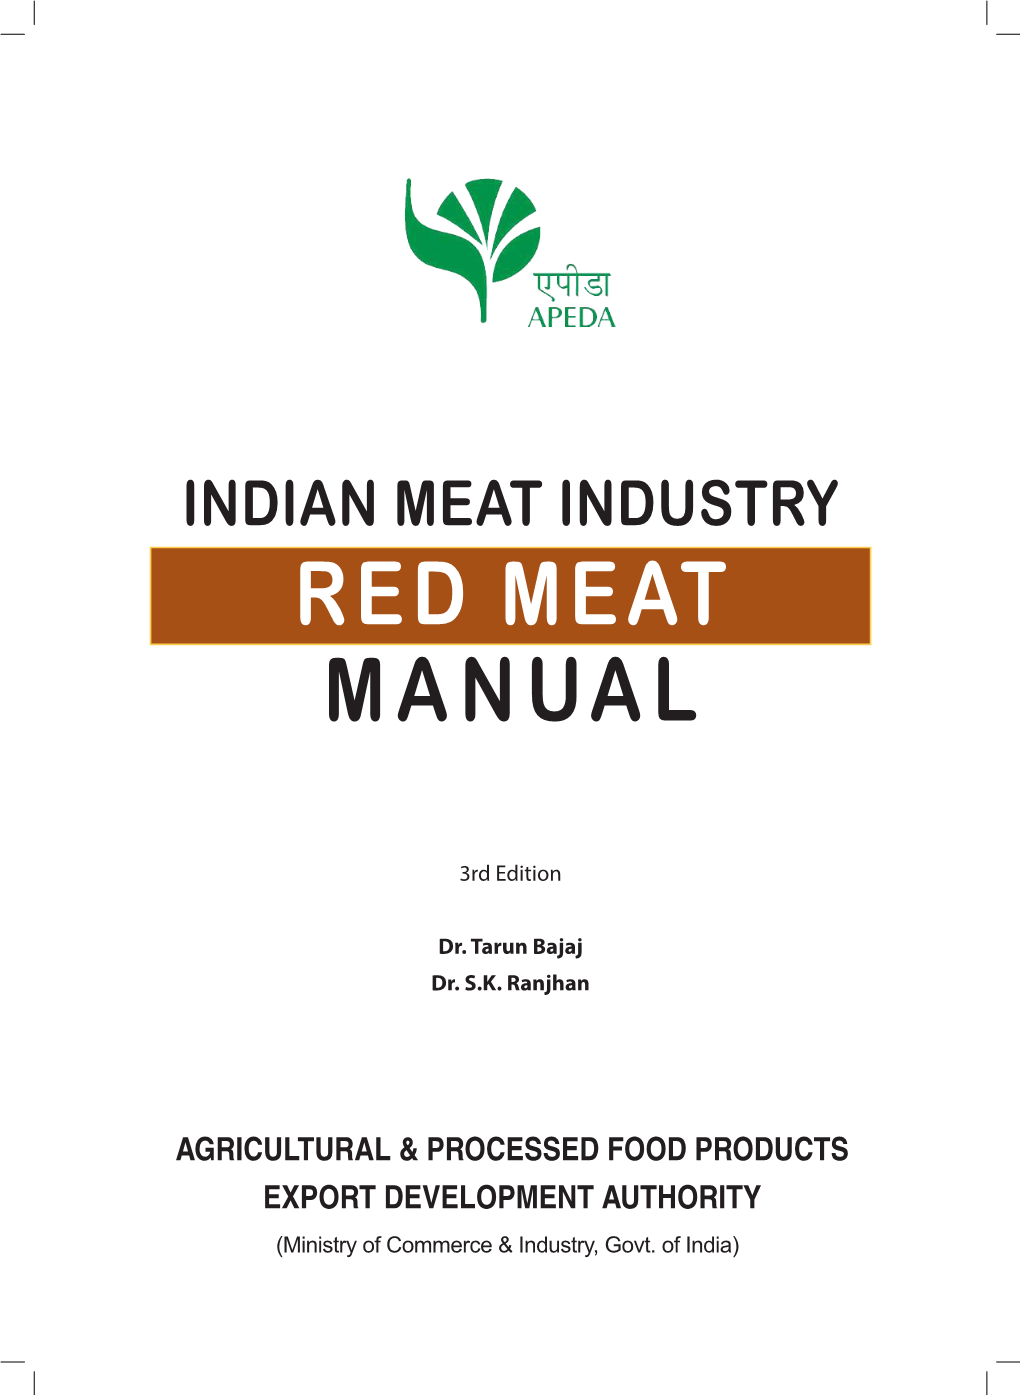 Red Meat Manual